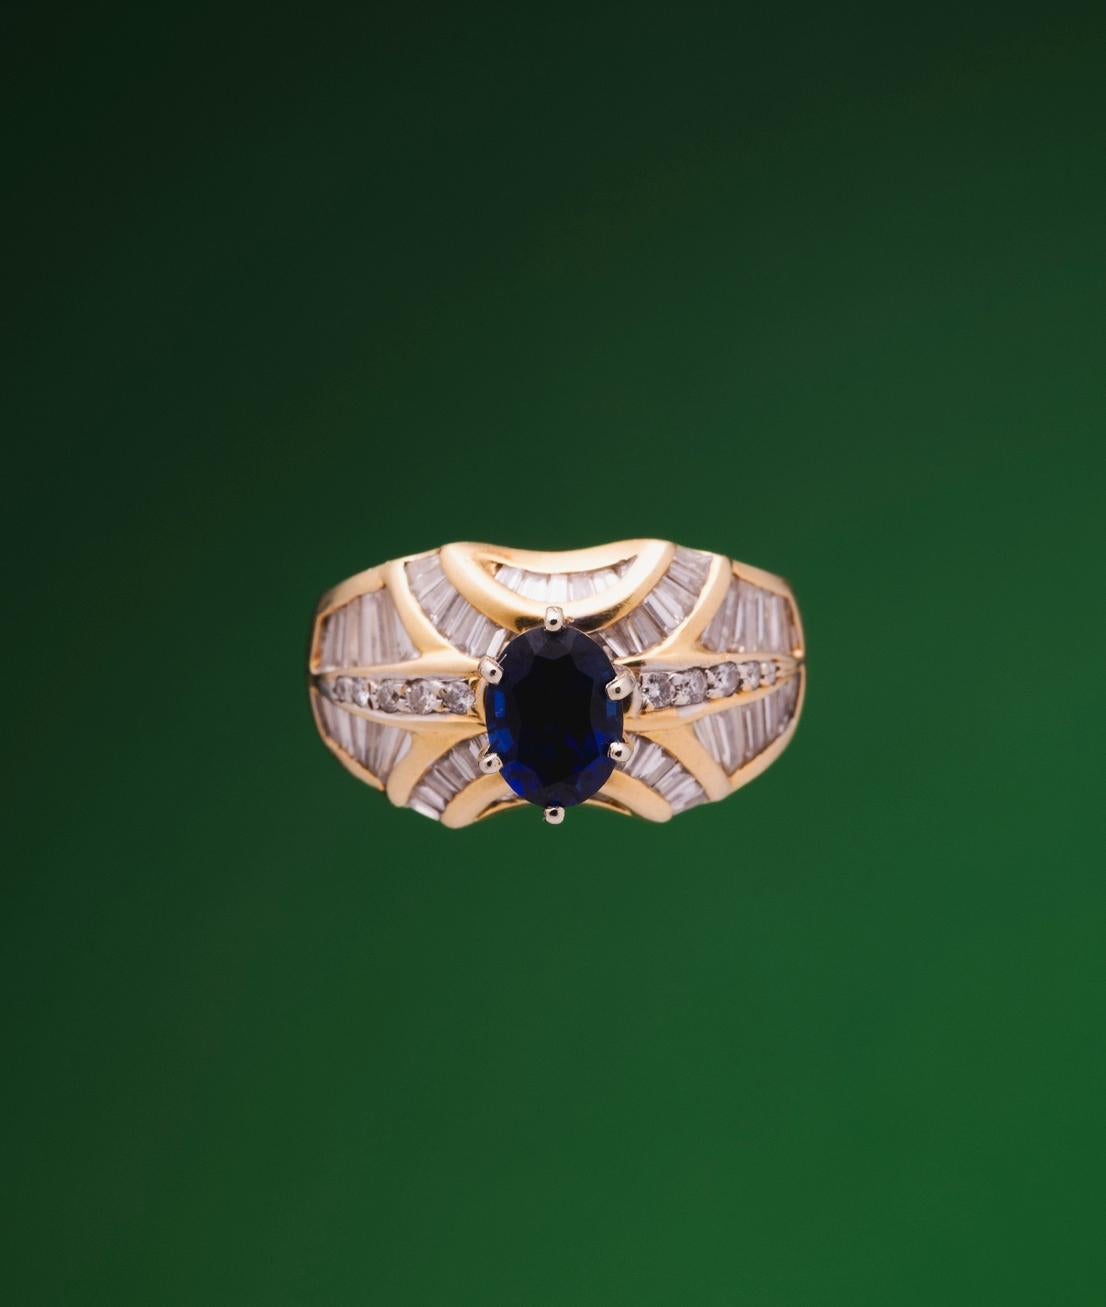 This Ring is a 18k yellow gold ring of 12 grams weight piece, filled with baguette diamonds, and a oval sapphire of 1 carat is antique design.